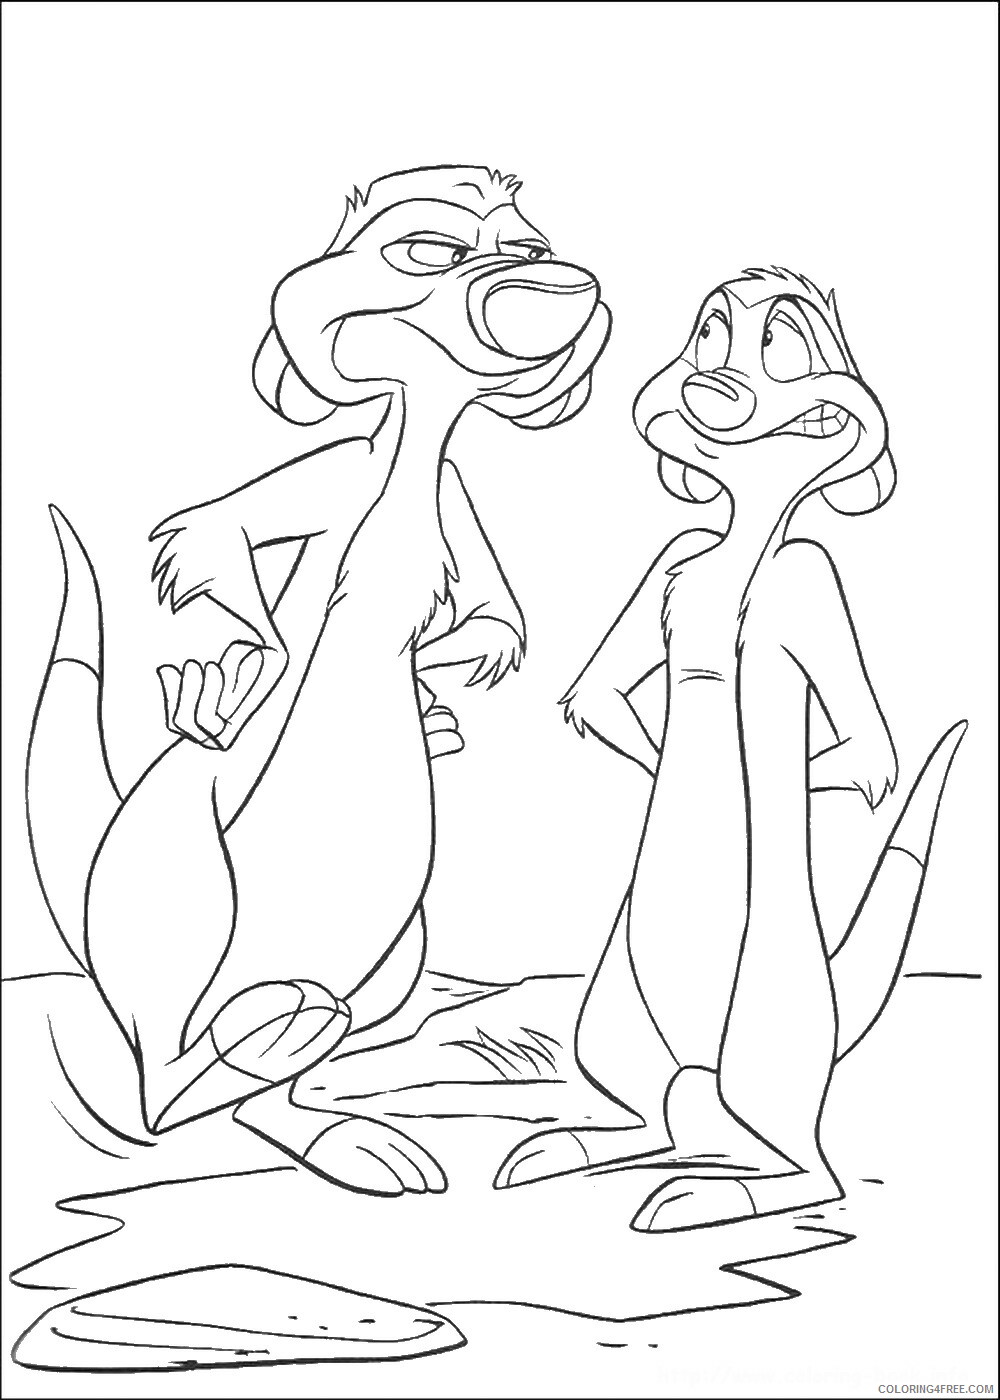 The Lion King Coloring Pages TV Film lionking_34 Printable 2020 09159 Coloring4free